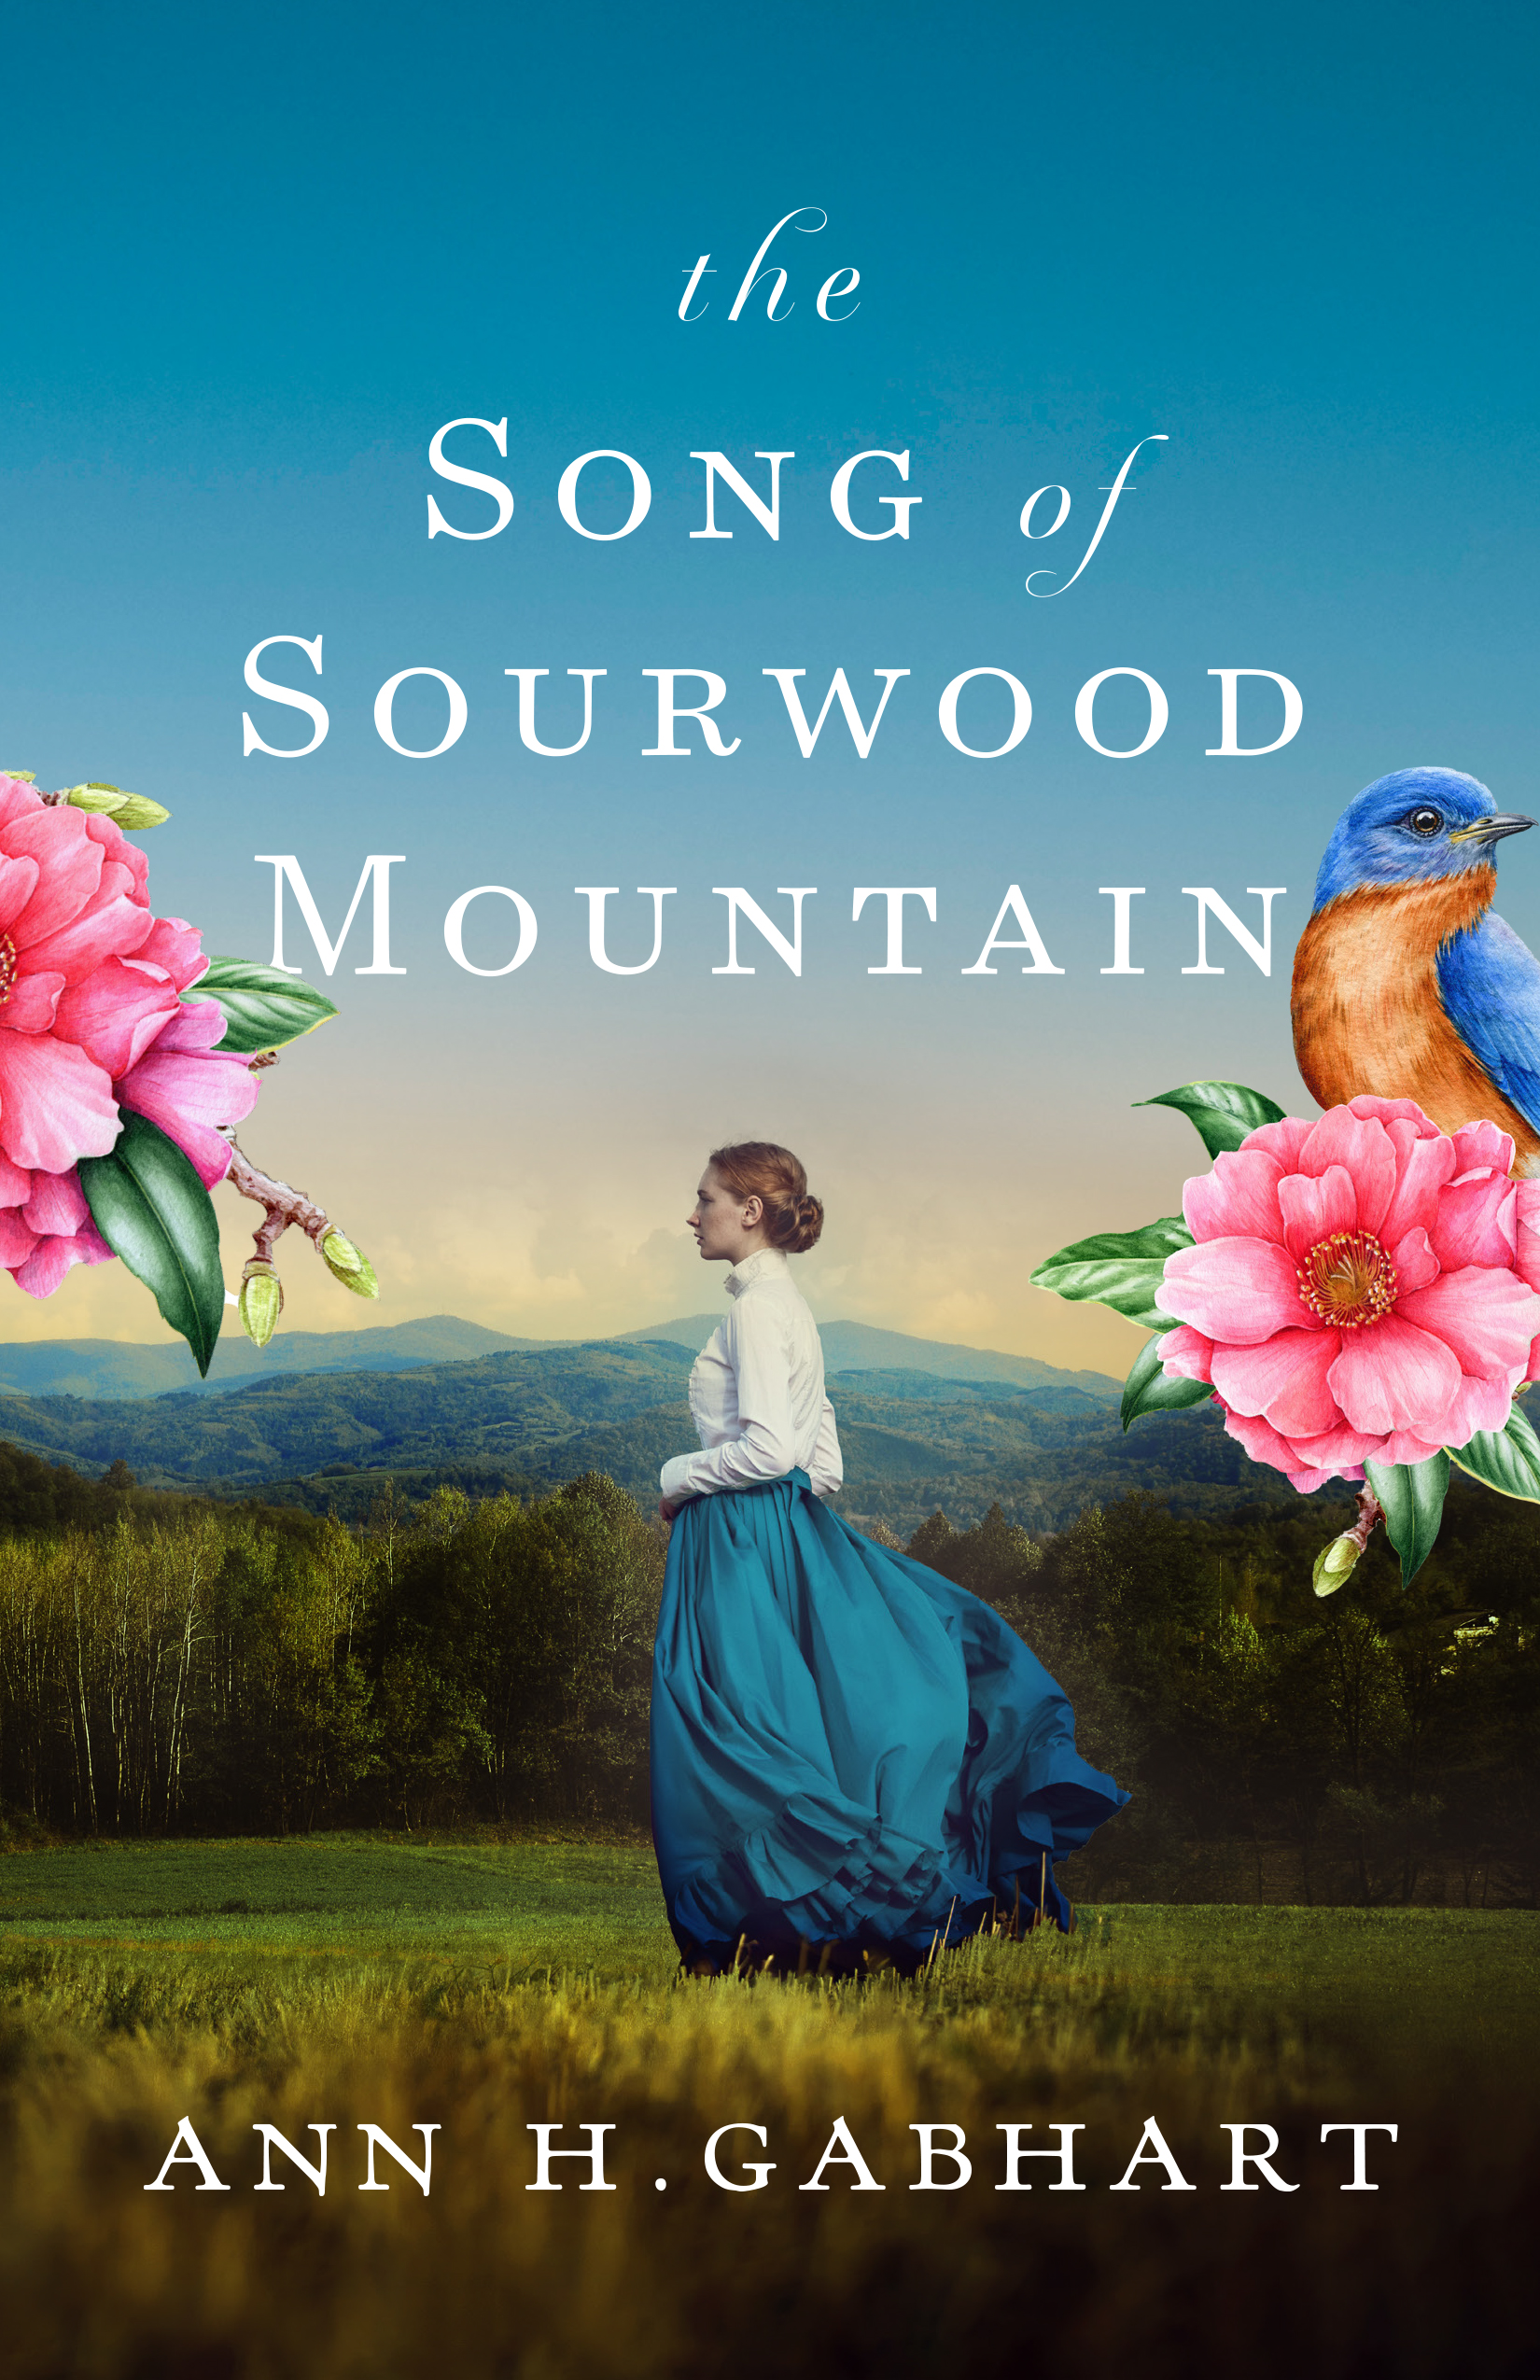 Book cover - The Song of Sourwood Mountain by Ann H. Gabhart